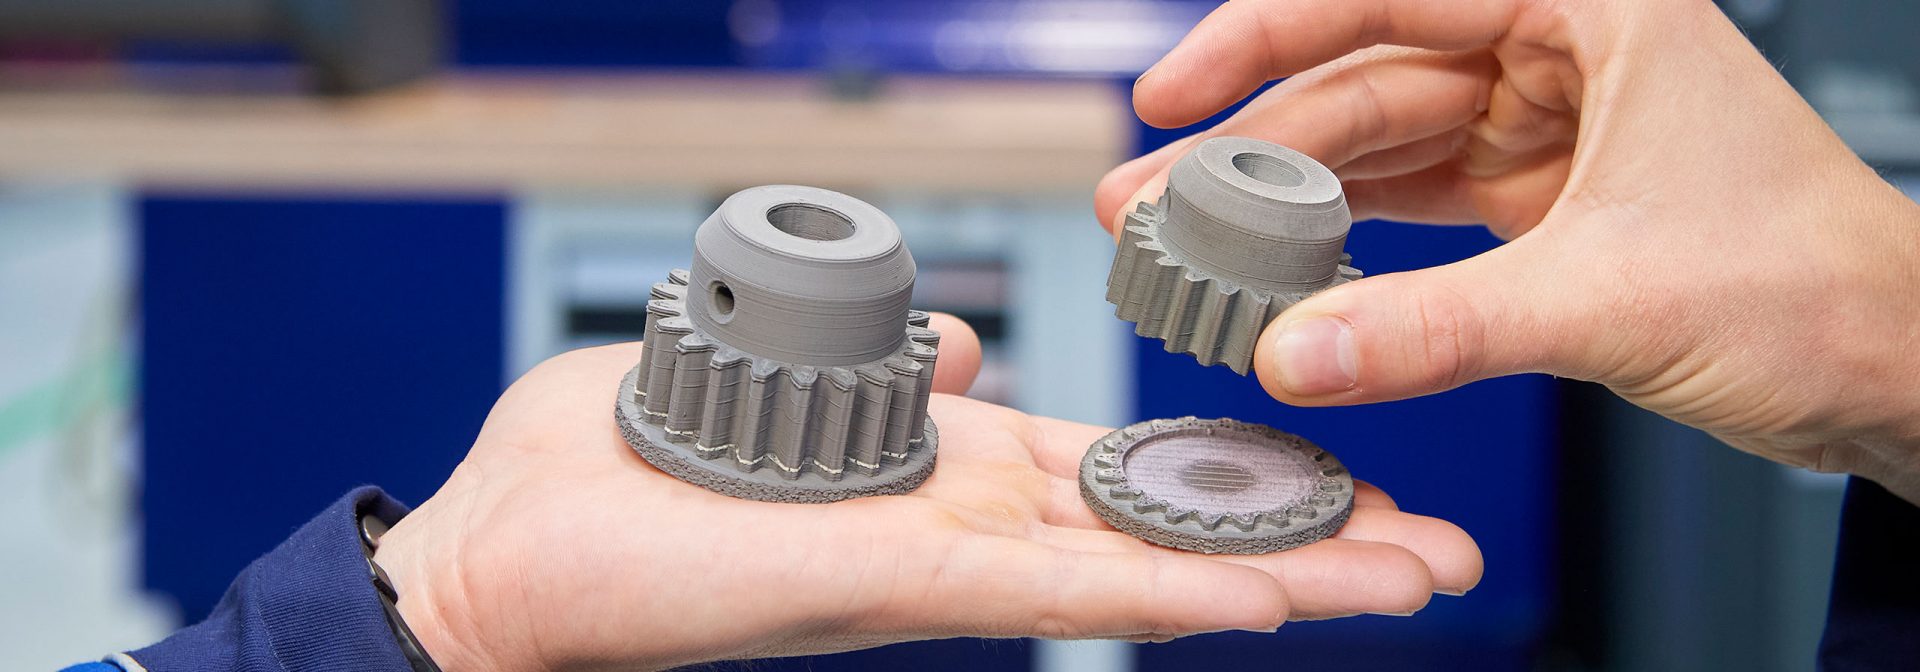 Gear wheels from the 3D printer